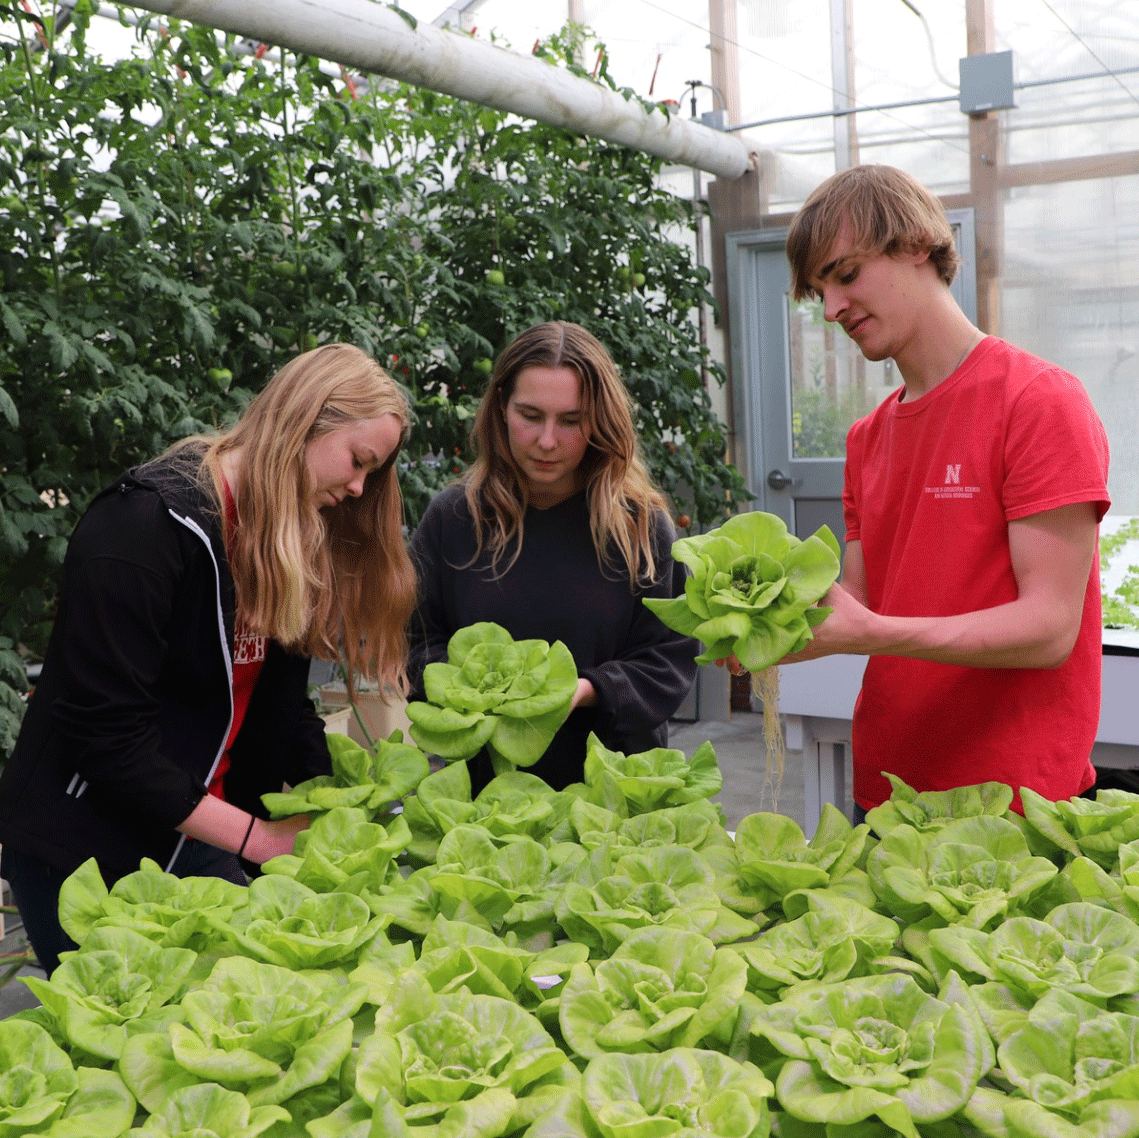 Students in the Horticulture 307 Hydroponics for Growing Populations class have been exploring different water culture approaches to plant production, specifically food crops.